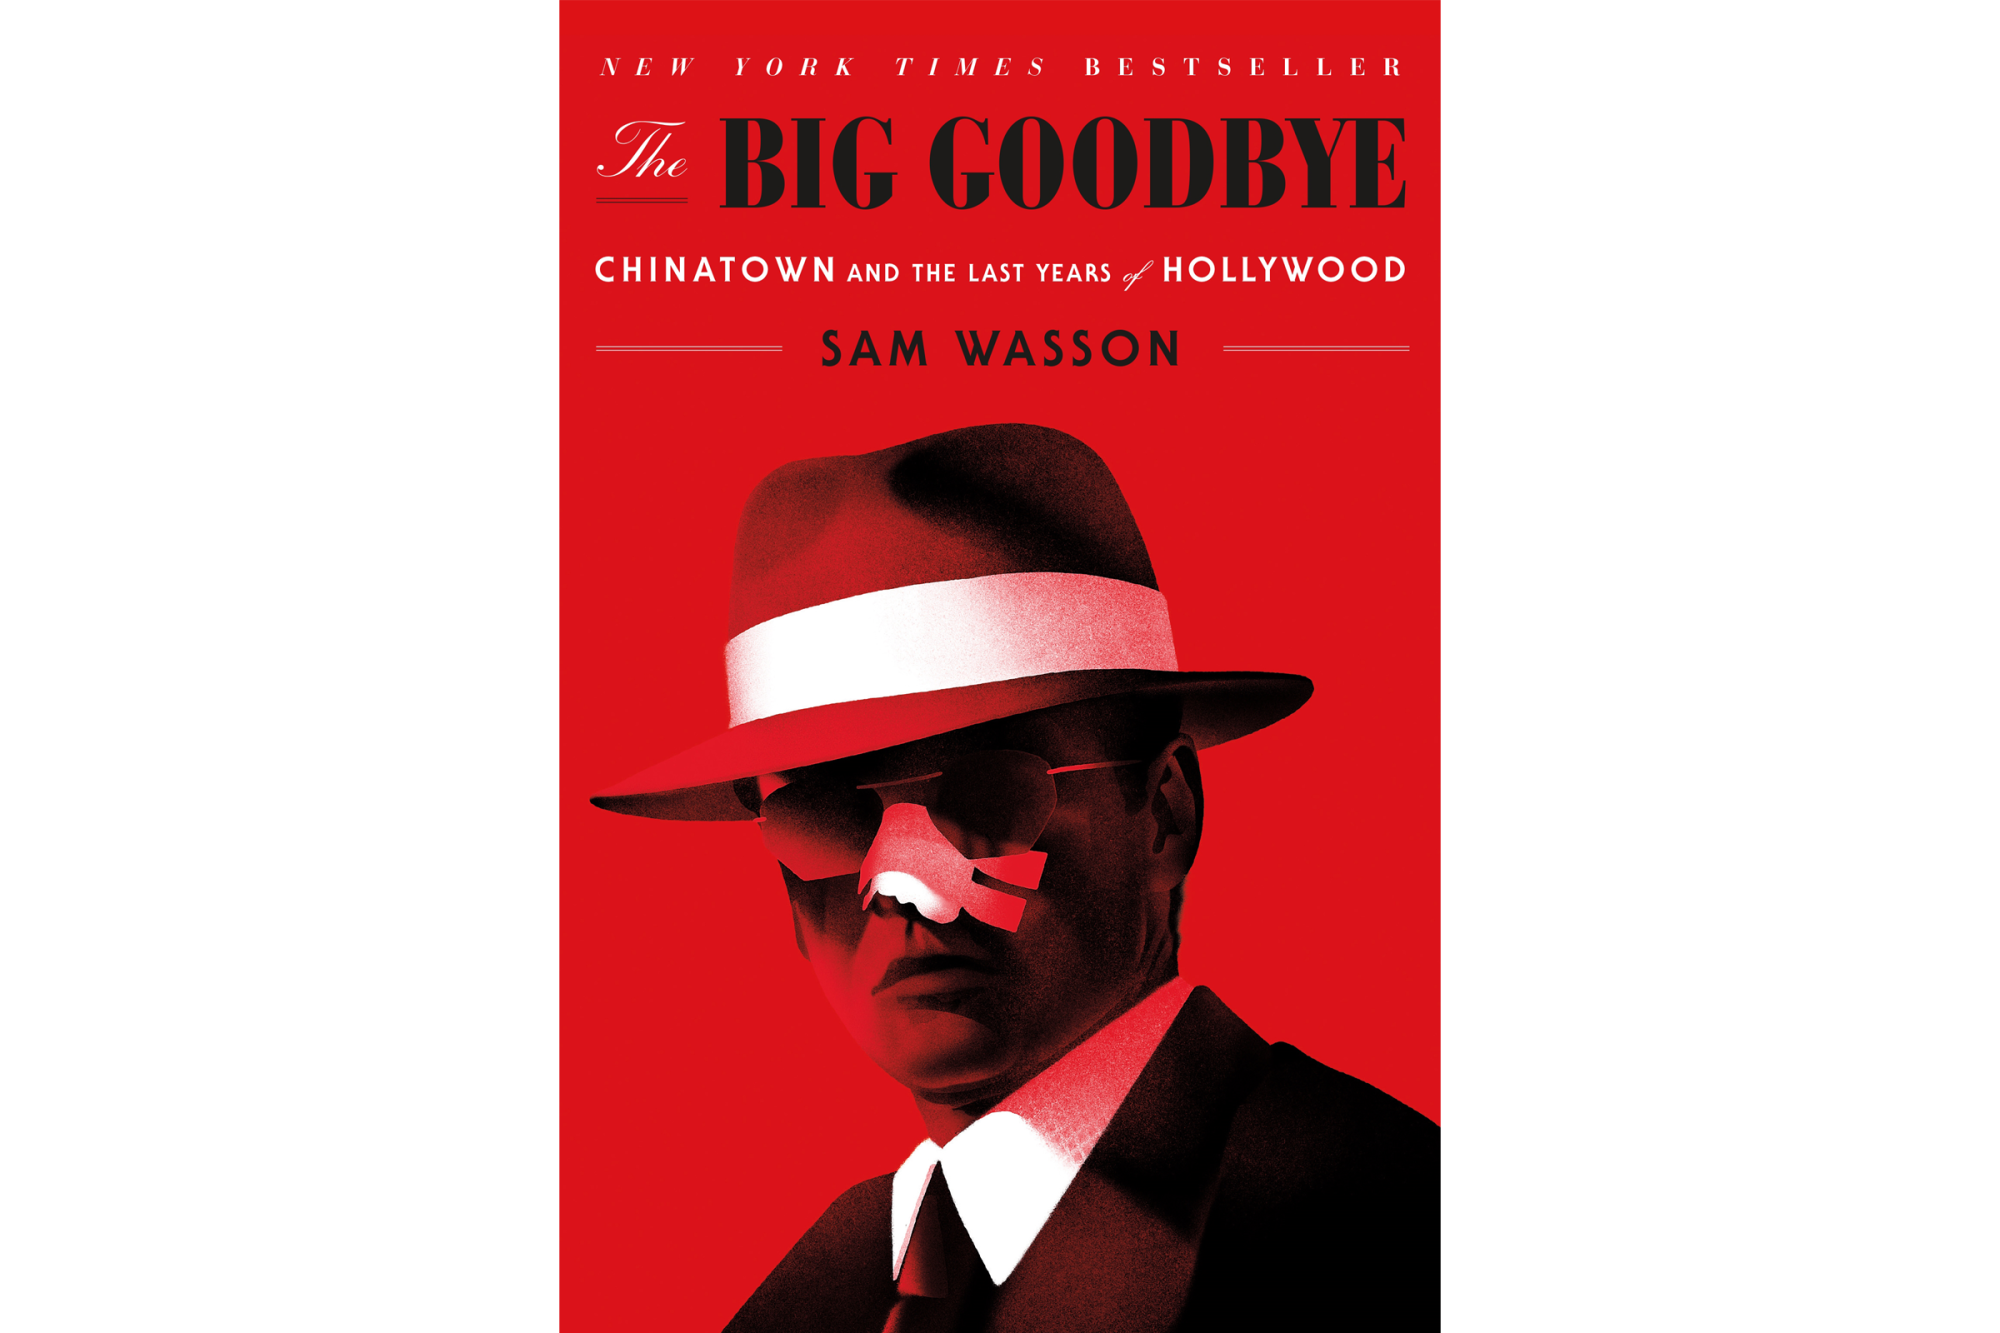 "The Big Goodbye: Chinatown and the Last Years of Hollywood" by Sam Wasson